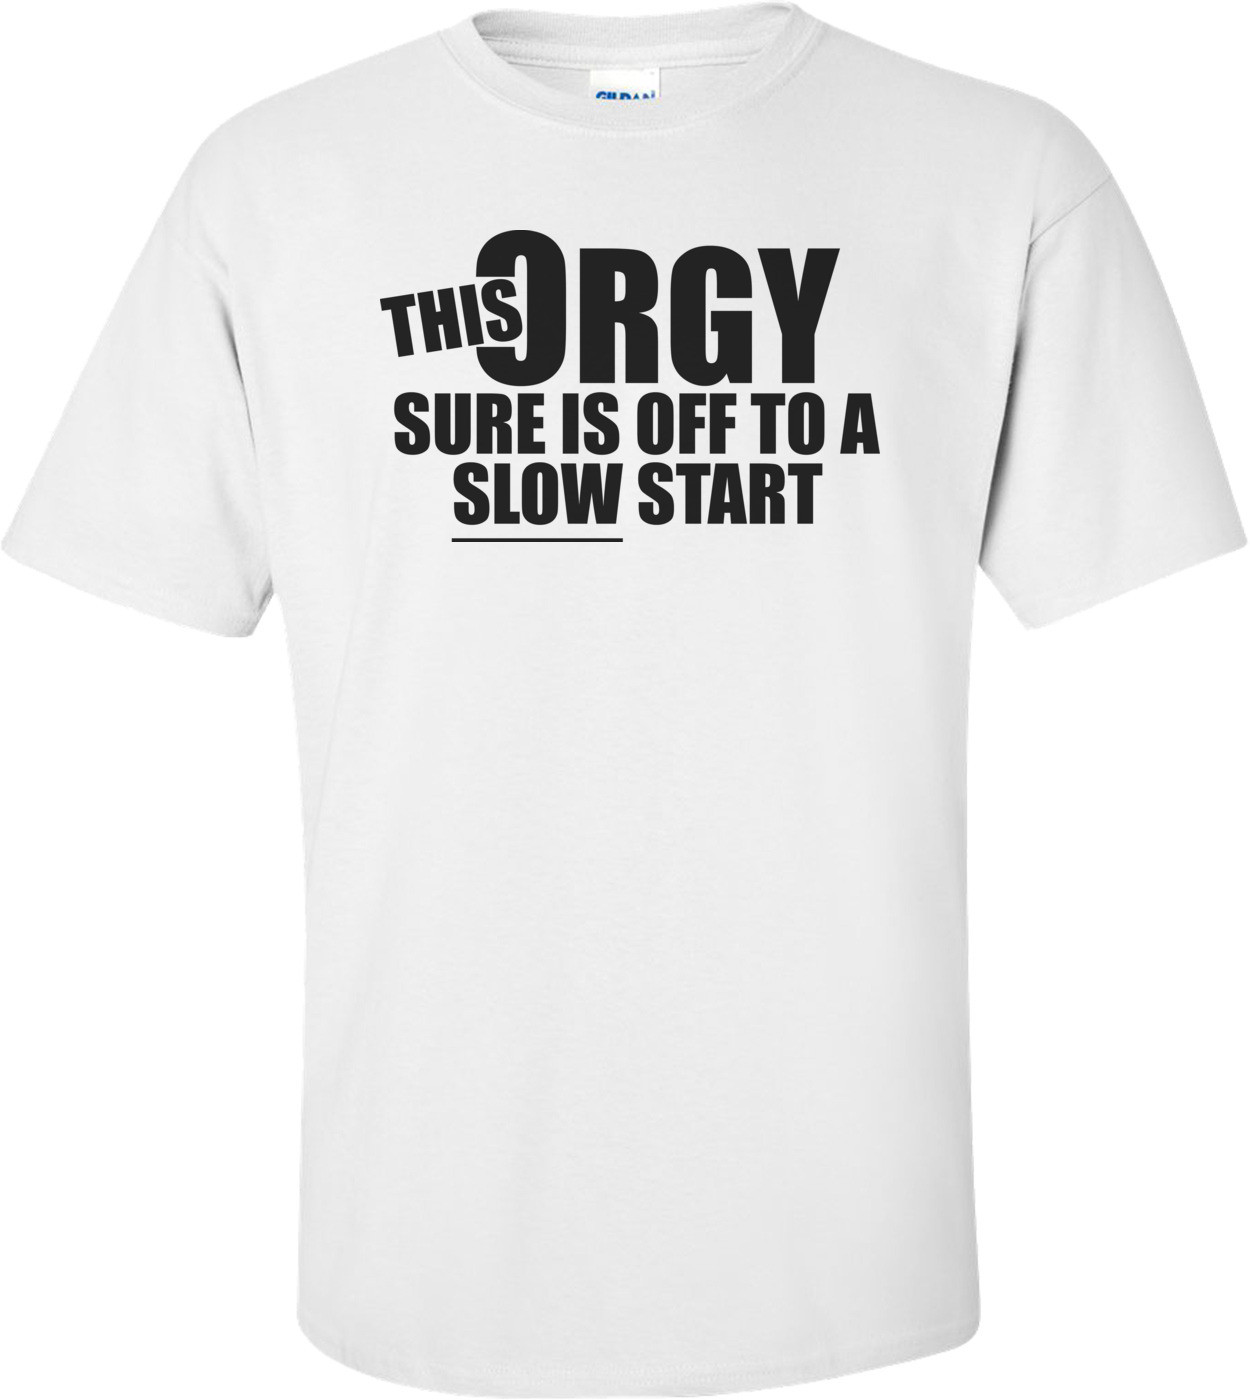 This Orgy Sure Is Off To A Slow Start Funny T-shirt